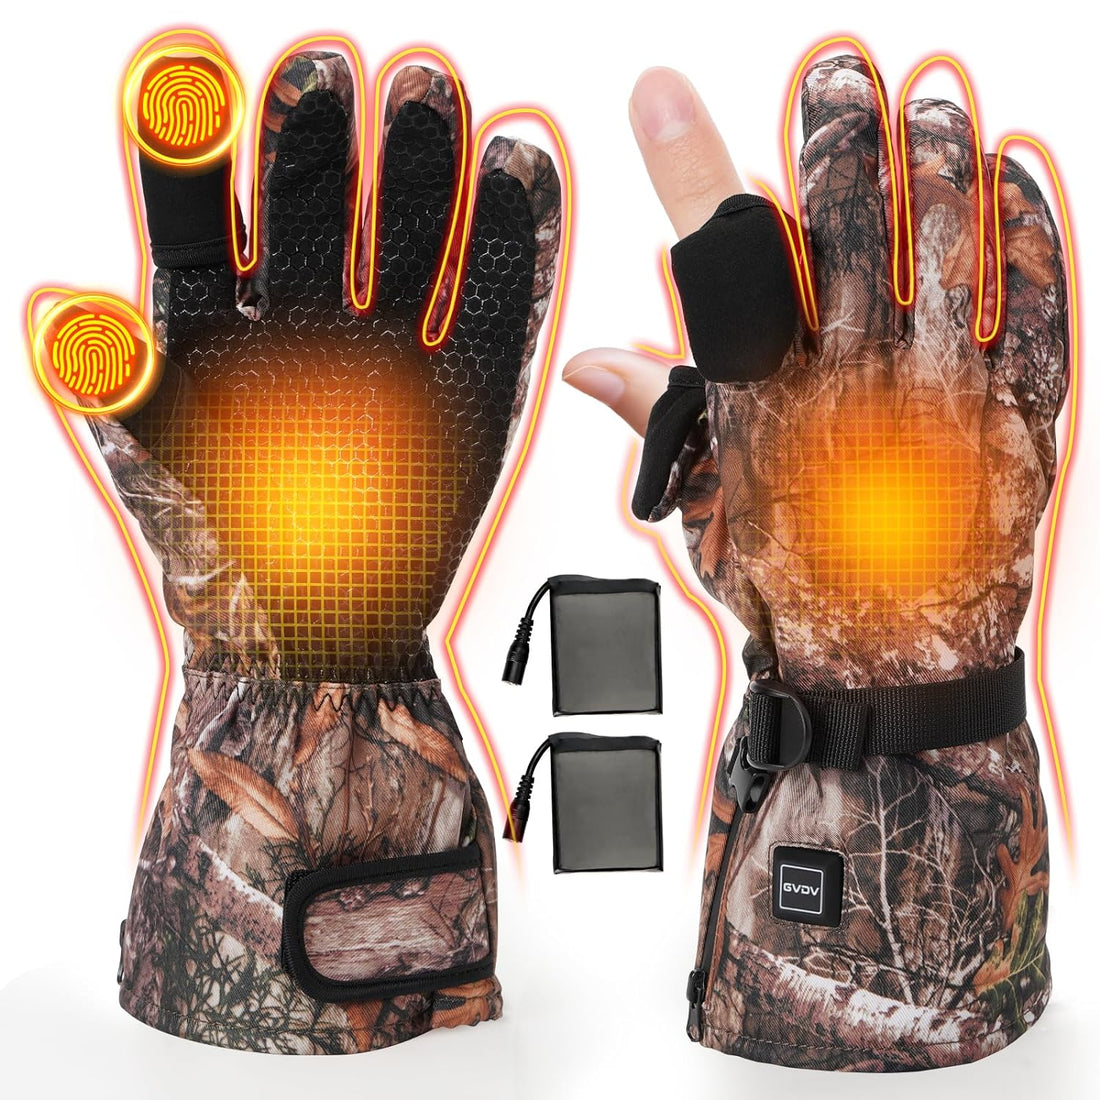 GVDV Hunting Heated Gloves for Men, 7.4V 3400mAh Rechargeable Touch Screen Heating Gloves with 2 Battery Packs, Winter Hand Warmers Glove for Outdoor Hunting Fishing Shooting Hiking, Camouflage, L